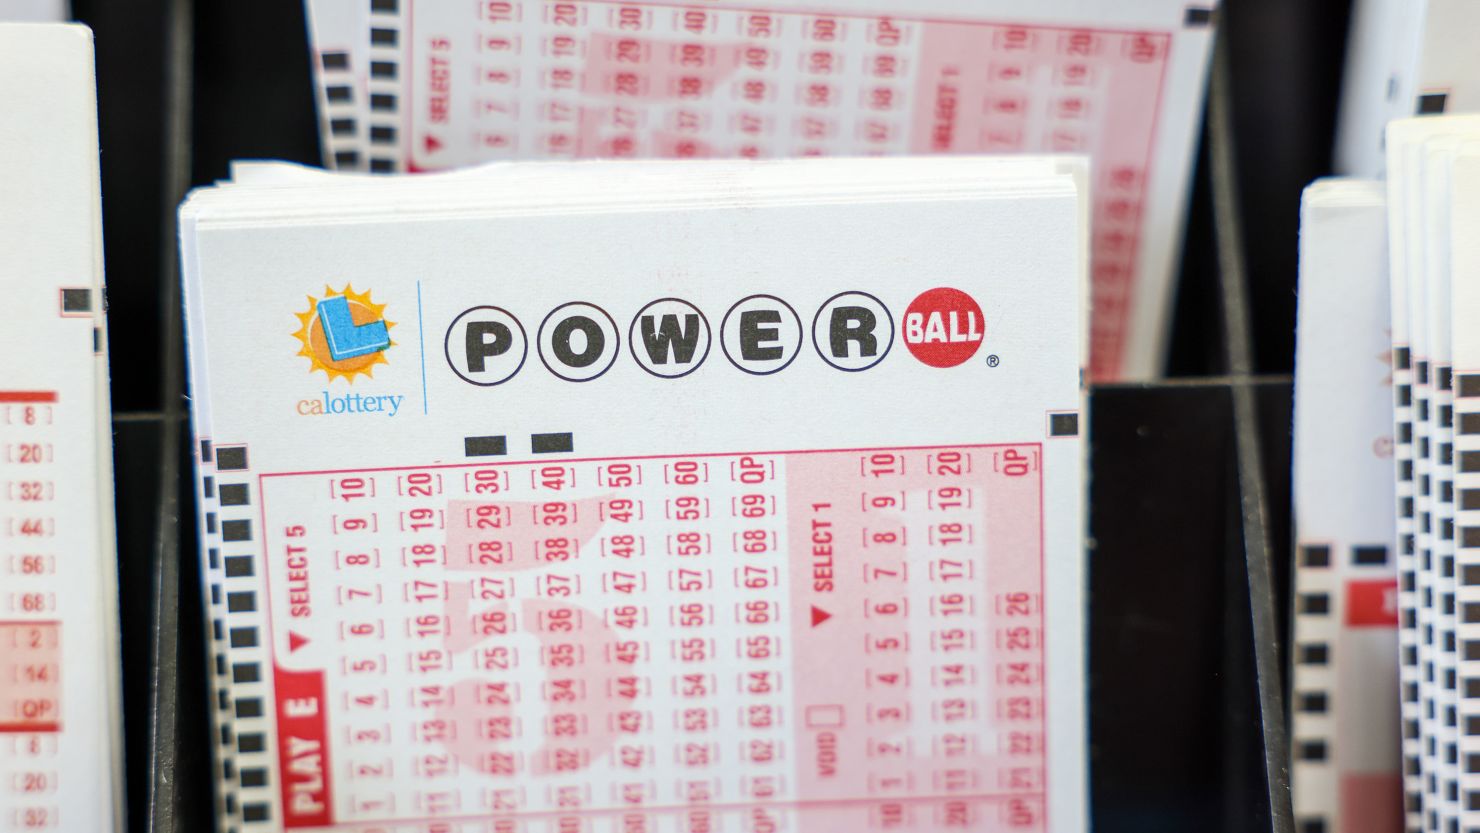 Tonight's Powerball drawing is the last of the year with a $760